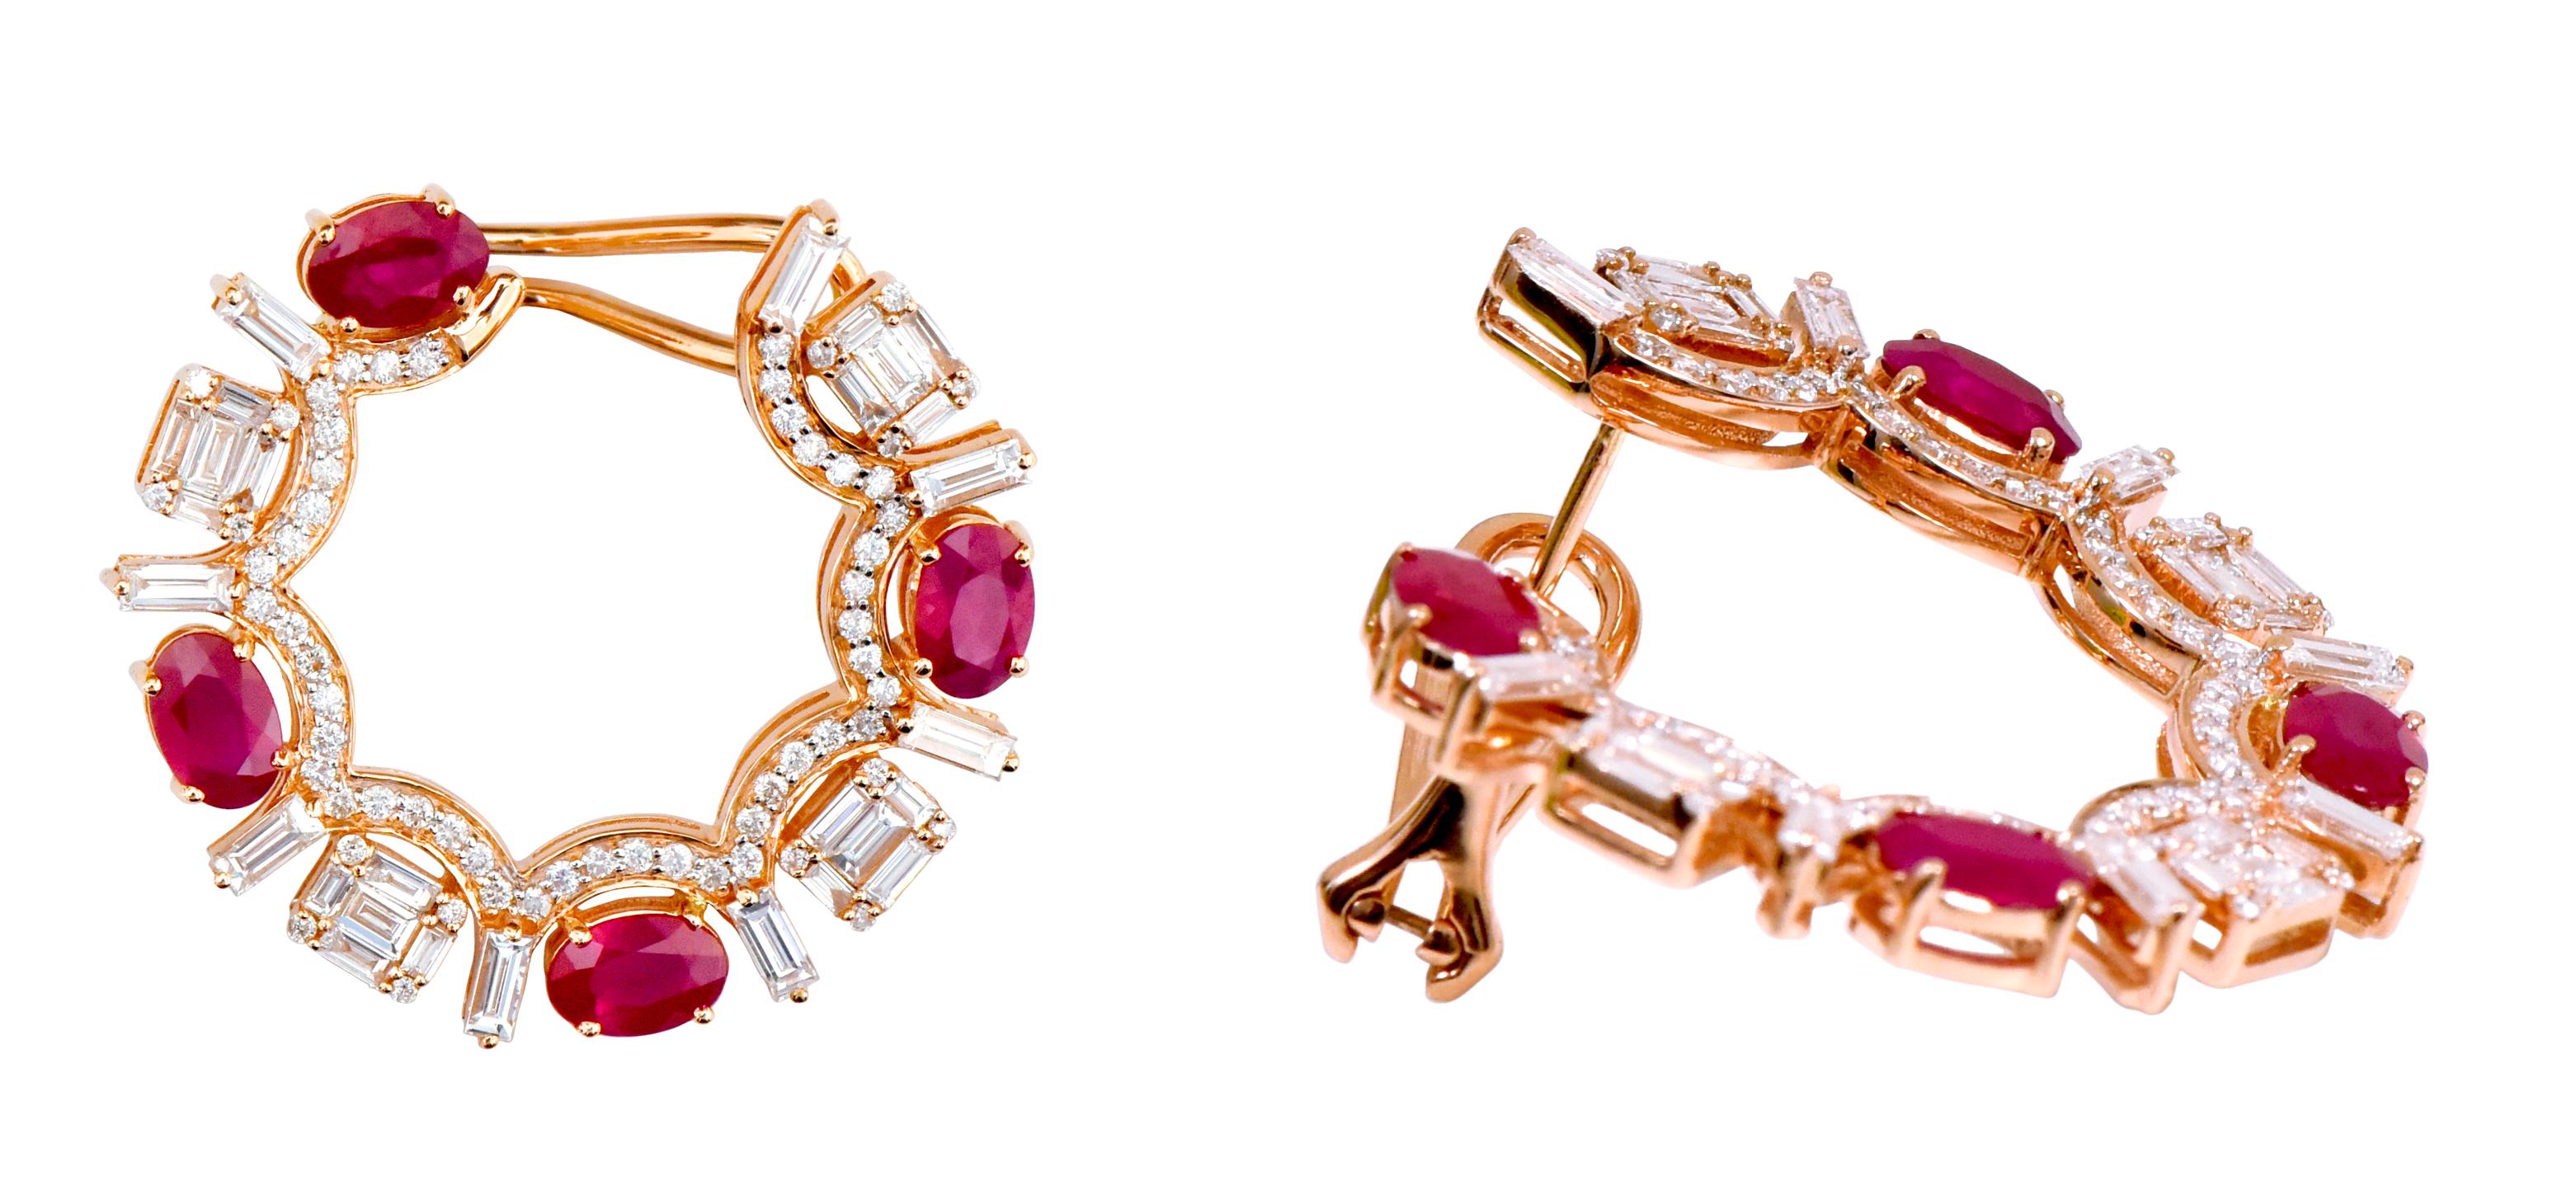 18 Karat Rose Gold 6.38 Carat Ruby and Diamond Modified Hoop Earrings

This exceptional vivid red ruby and invisible set emerald cut diamond modern hoop earring is impressive. The beautiful roundish-octagonal shape of the hoop earring formed with an